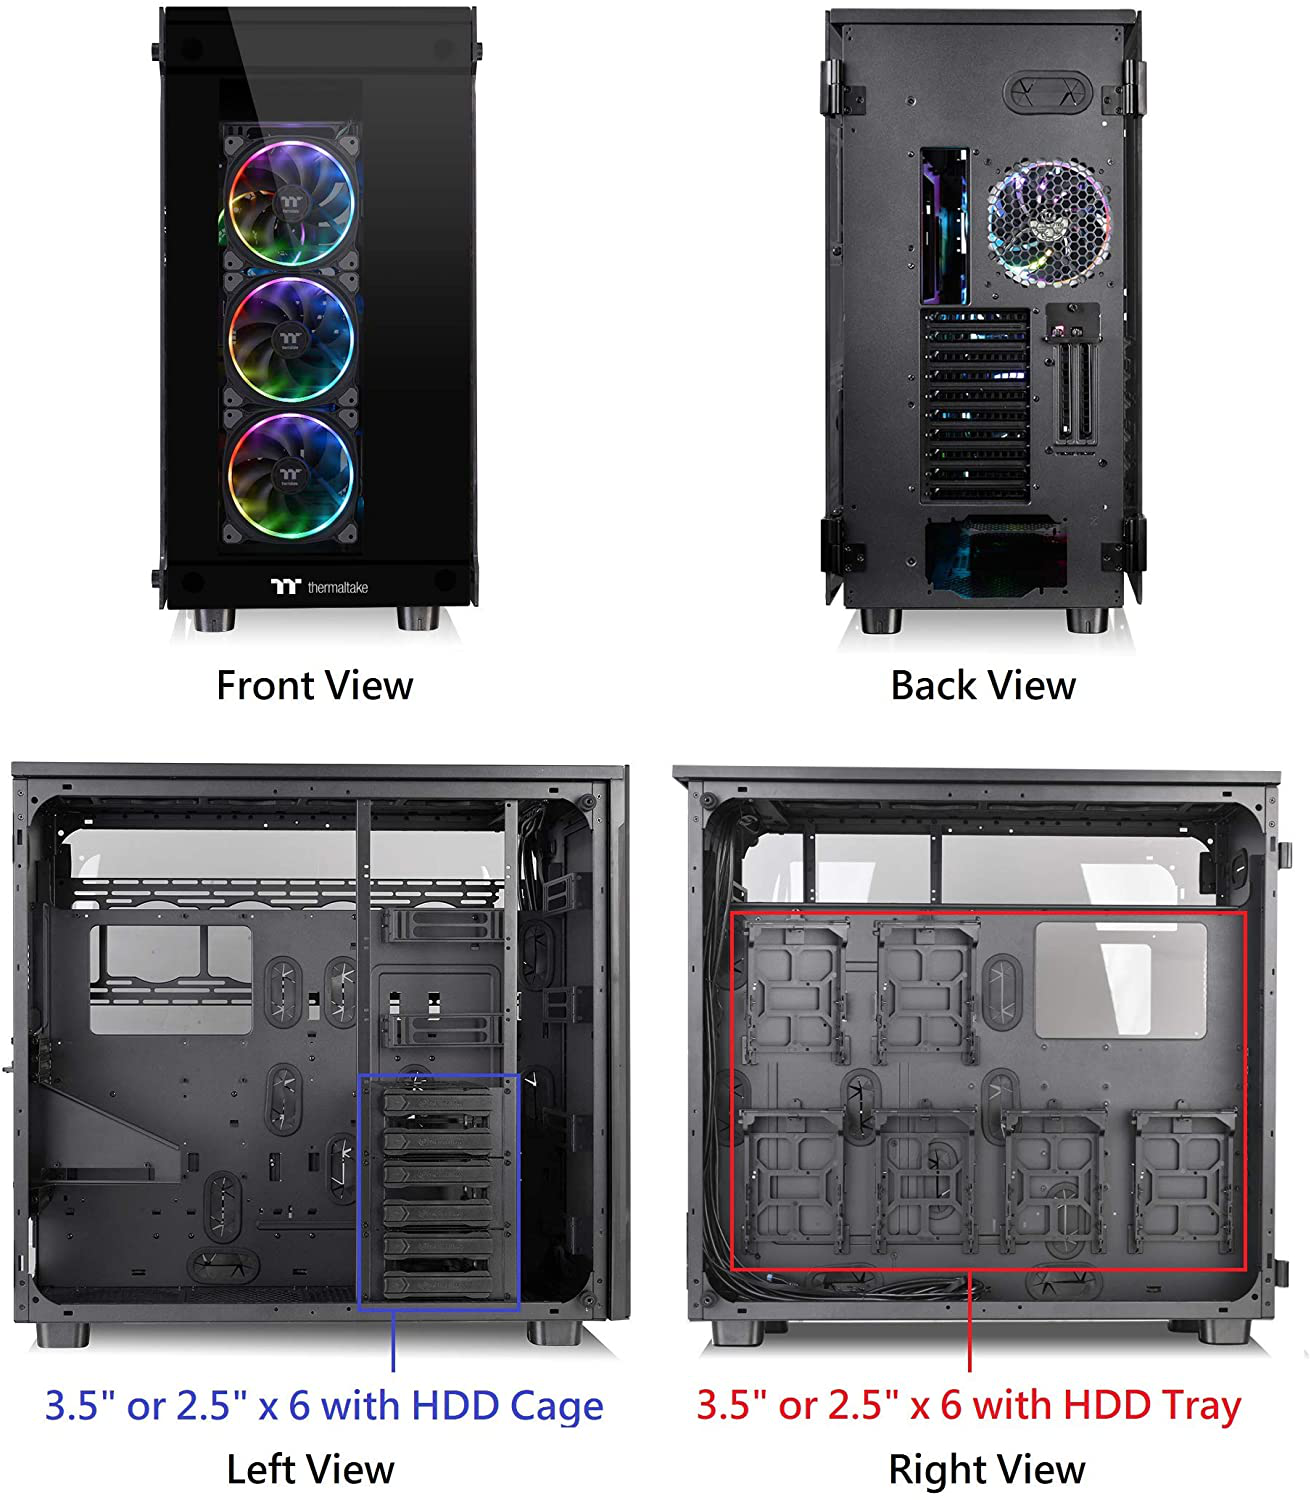 Thermaltake View 91 RGB plus Tempered Glass Vertical GPU Modular SPCC XL-ATX Gaming Super Tower Computer Case with 4 RGB Riing plus Fan Pre-Installed CA-1I9-00F1WN-00